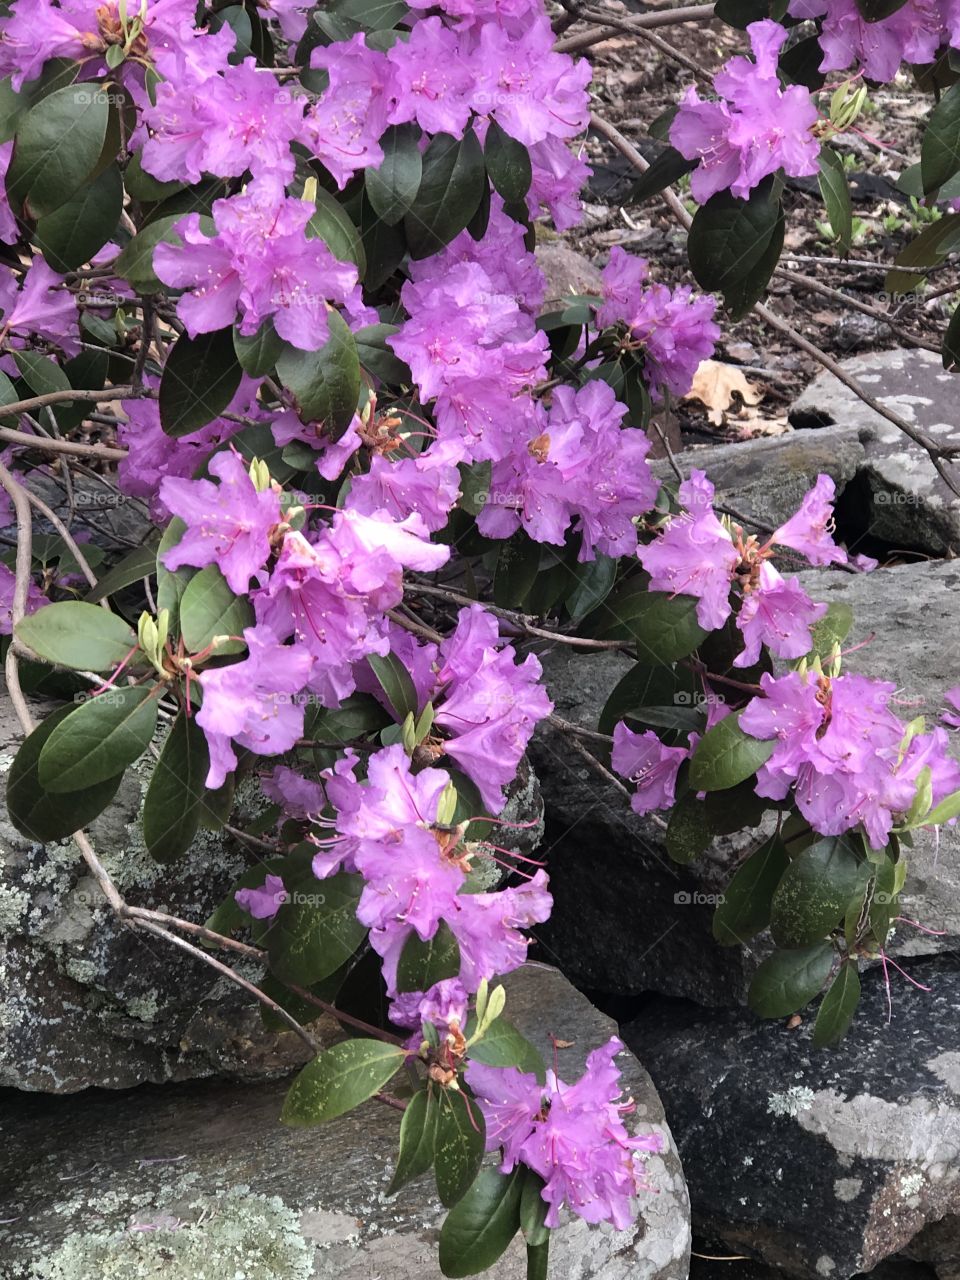 Rhododendron in bloom growing over rocks in Spring